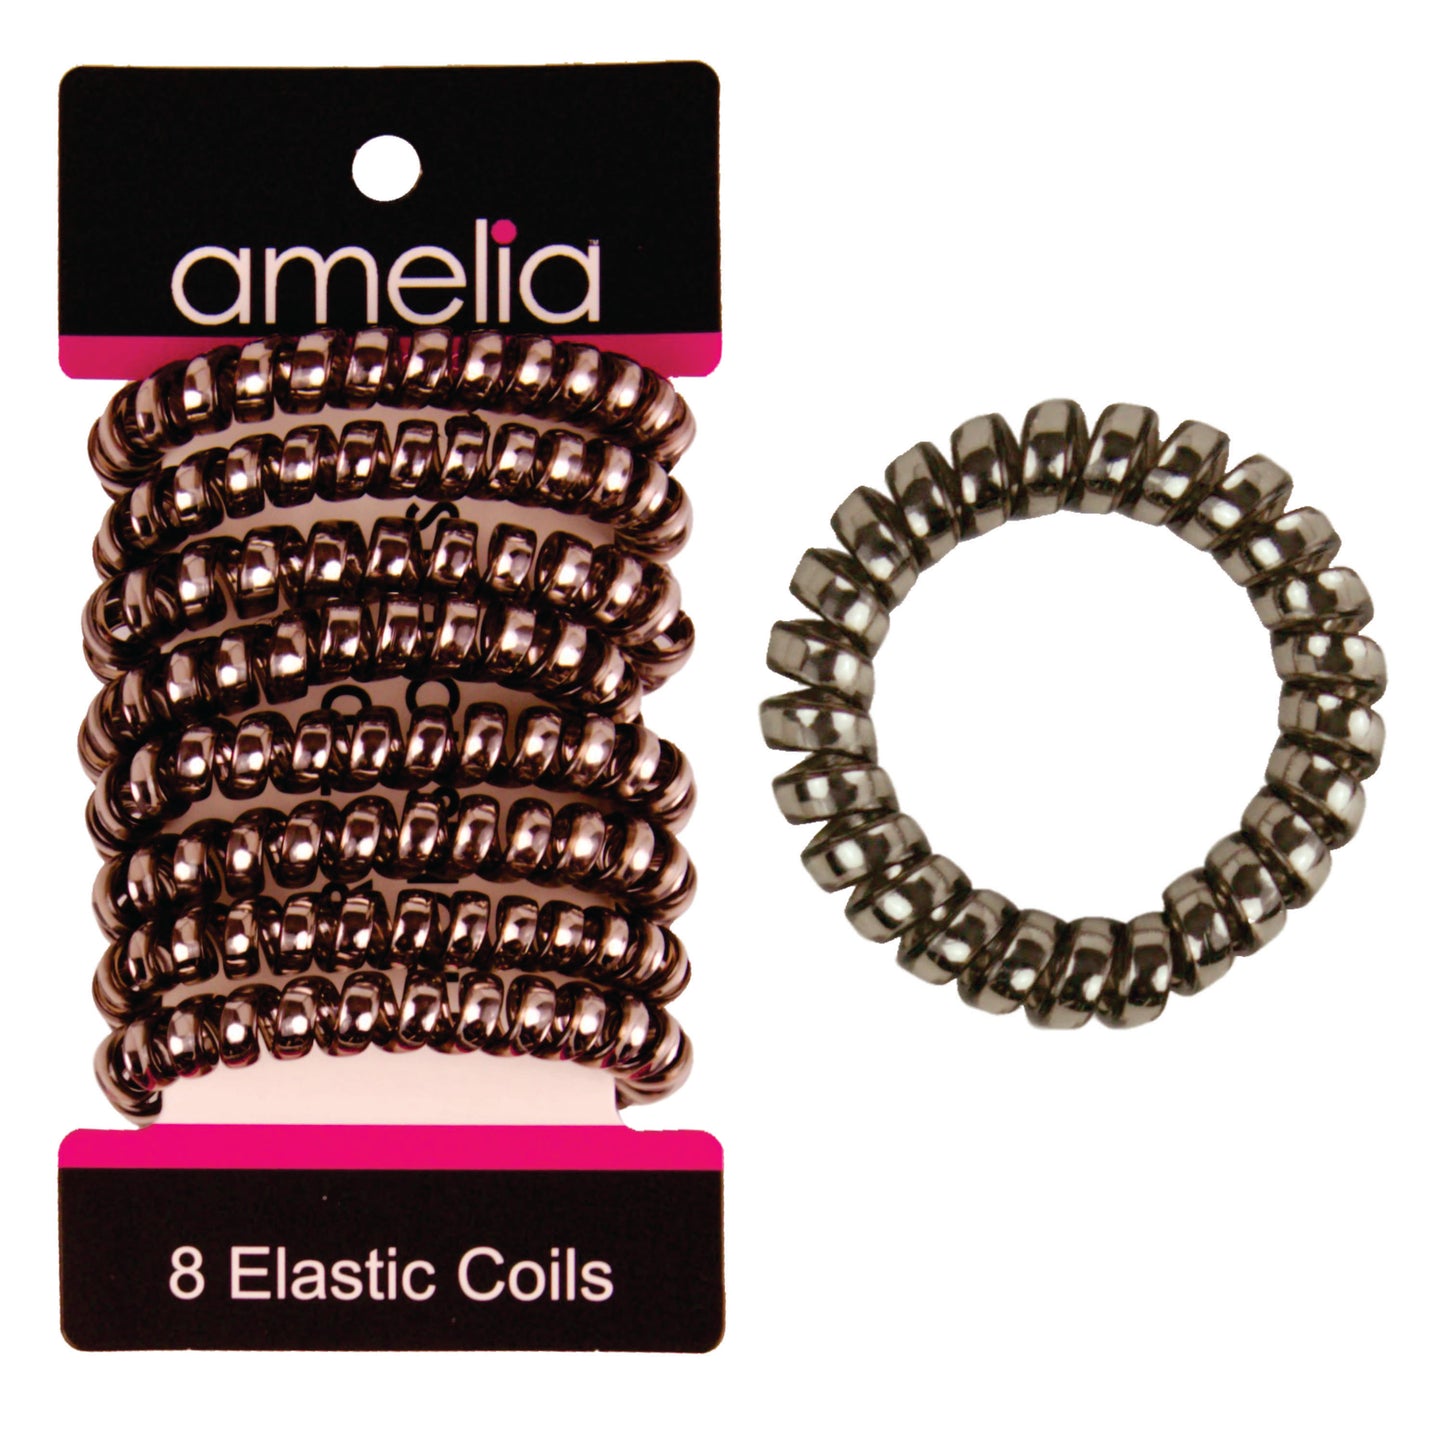 Amelia Beauty Products 8 Medium Smooth Elastic Hair Coils, 2.25in Diameter Spiral Hair Ties, Gentle on Hair, Strong Hold and Minimizes Dents and Creases, Nickel